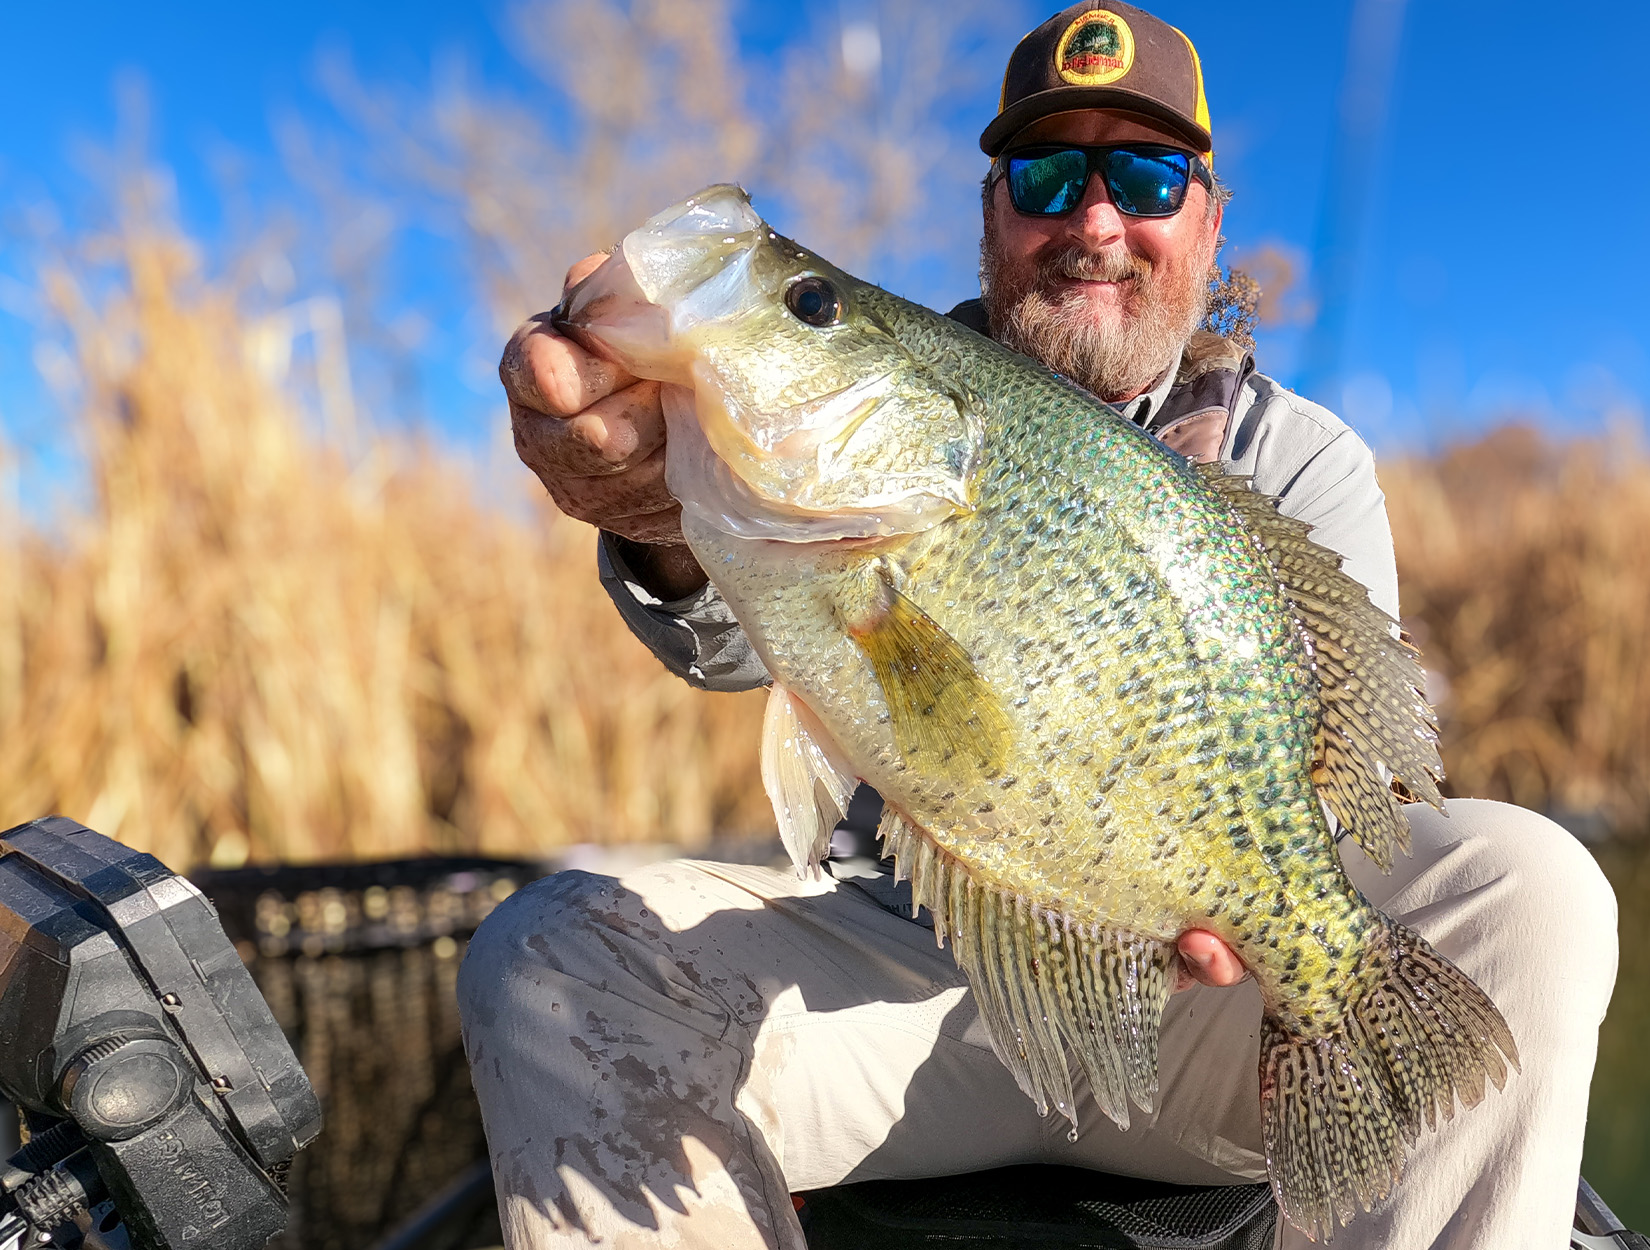 Kayak Angler Catches New State-Record Crappie with Forward Facing